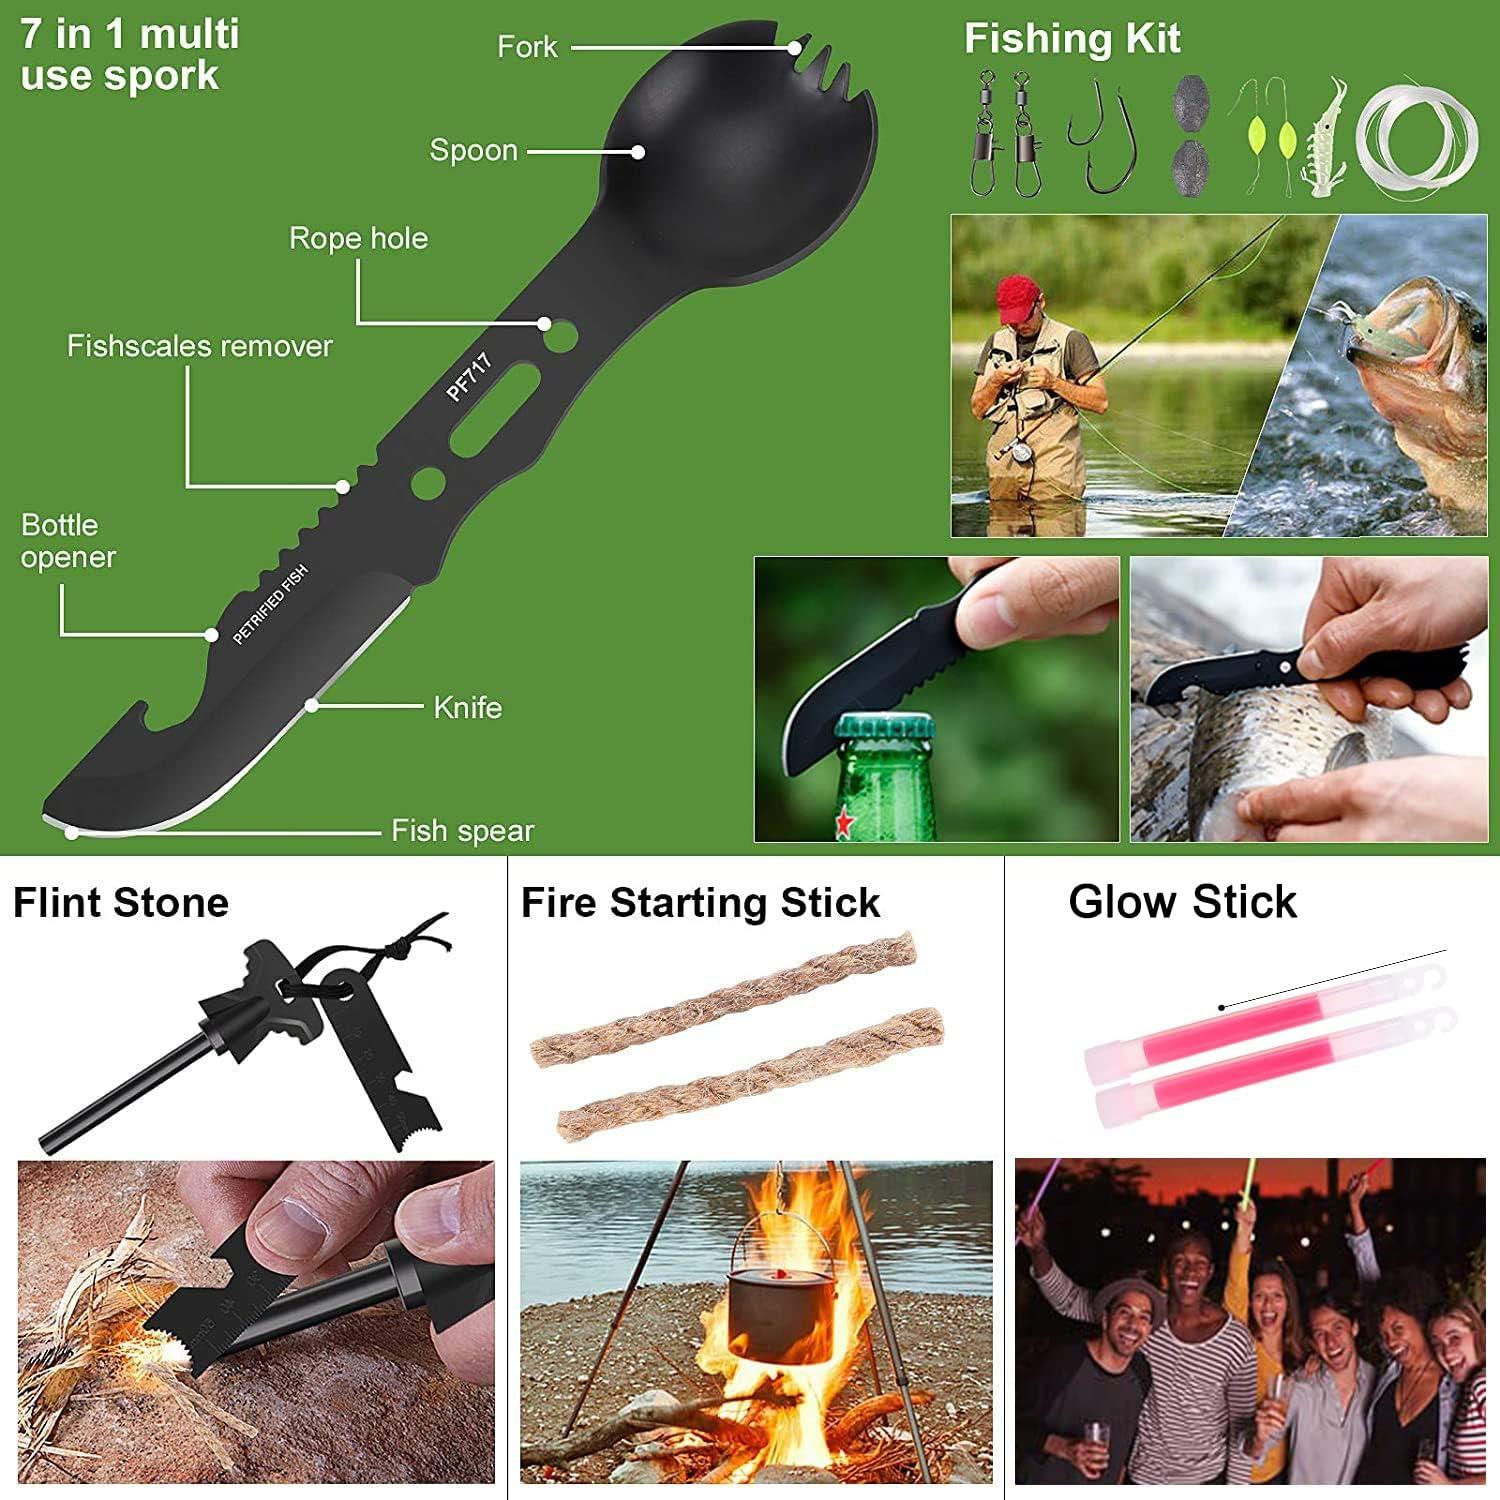 Emergency Survival Kit Professional Survival Gear Tool First Aid Supplies  For Camping High Quality